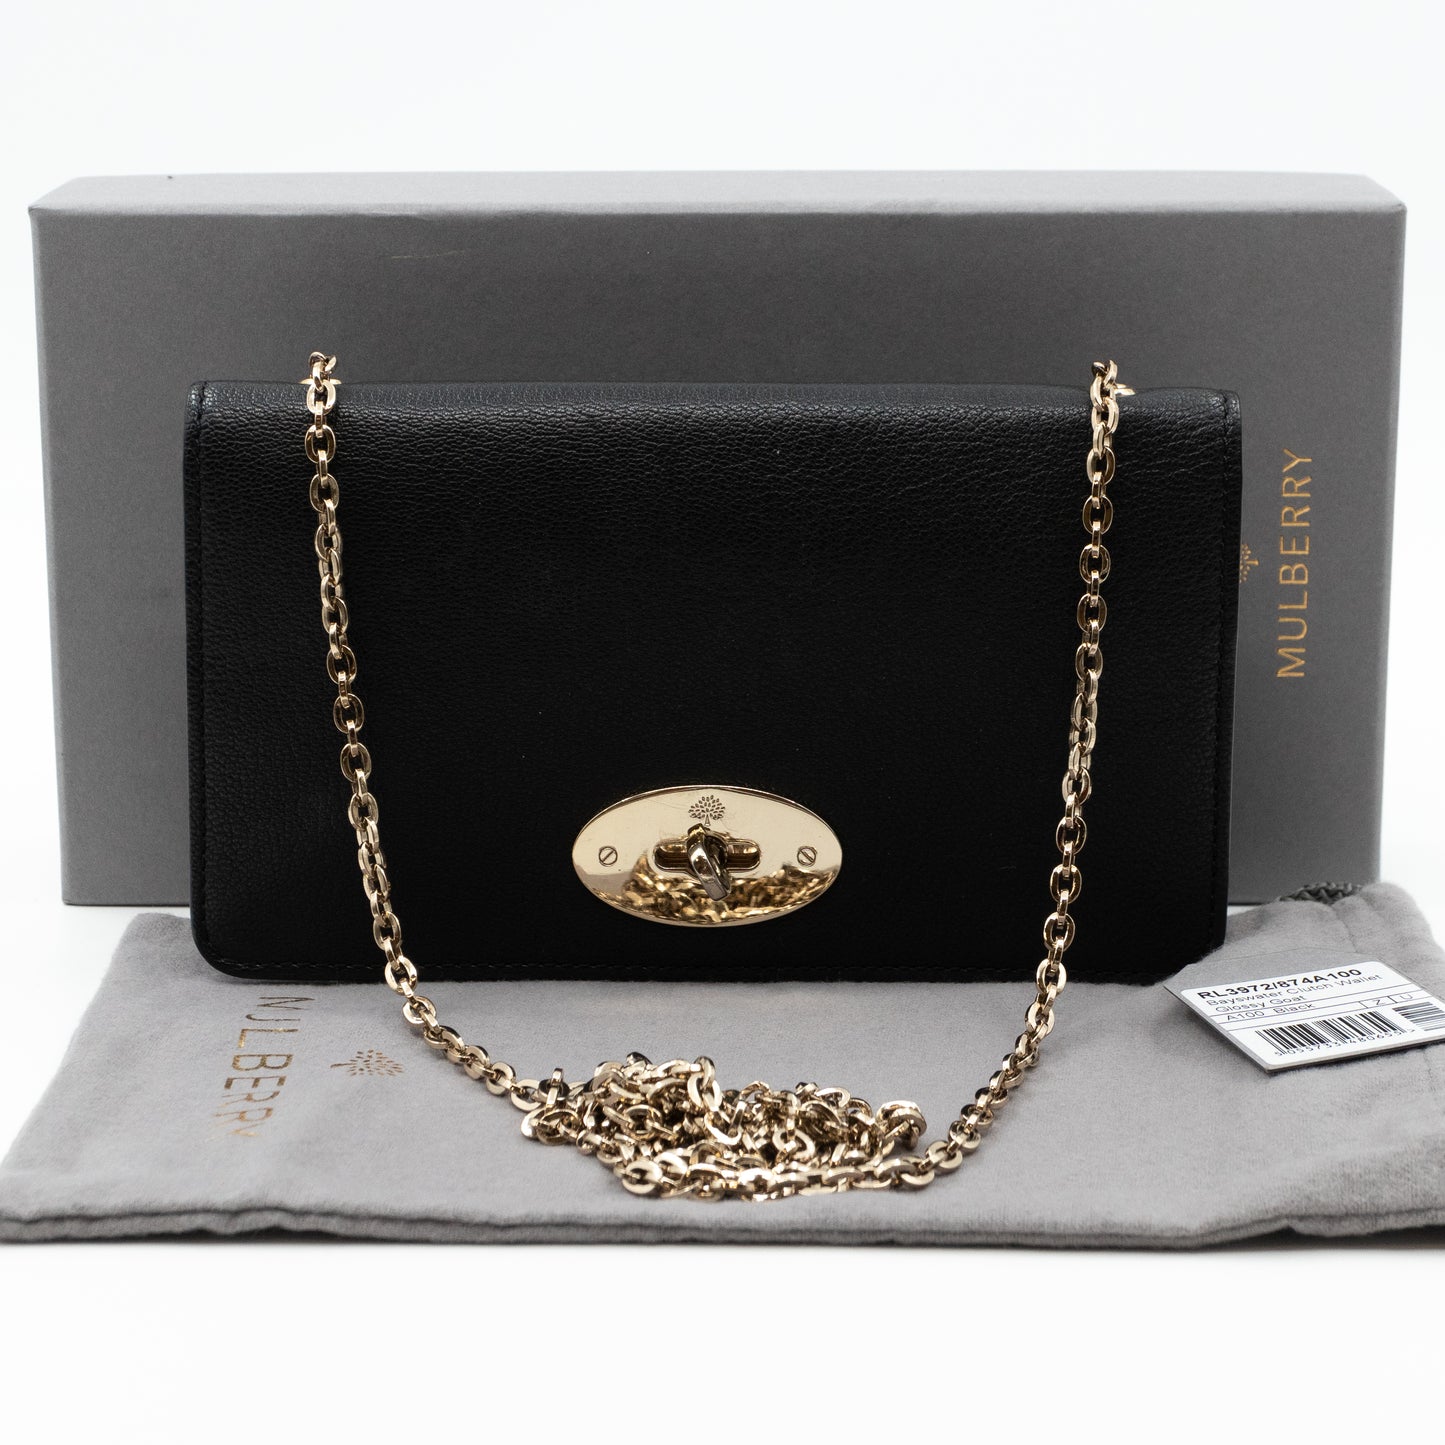 Bayswater Clutch Wallet Chain Black Leather